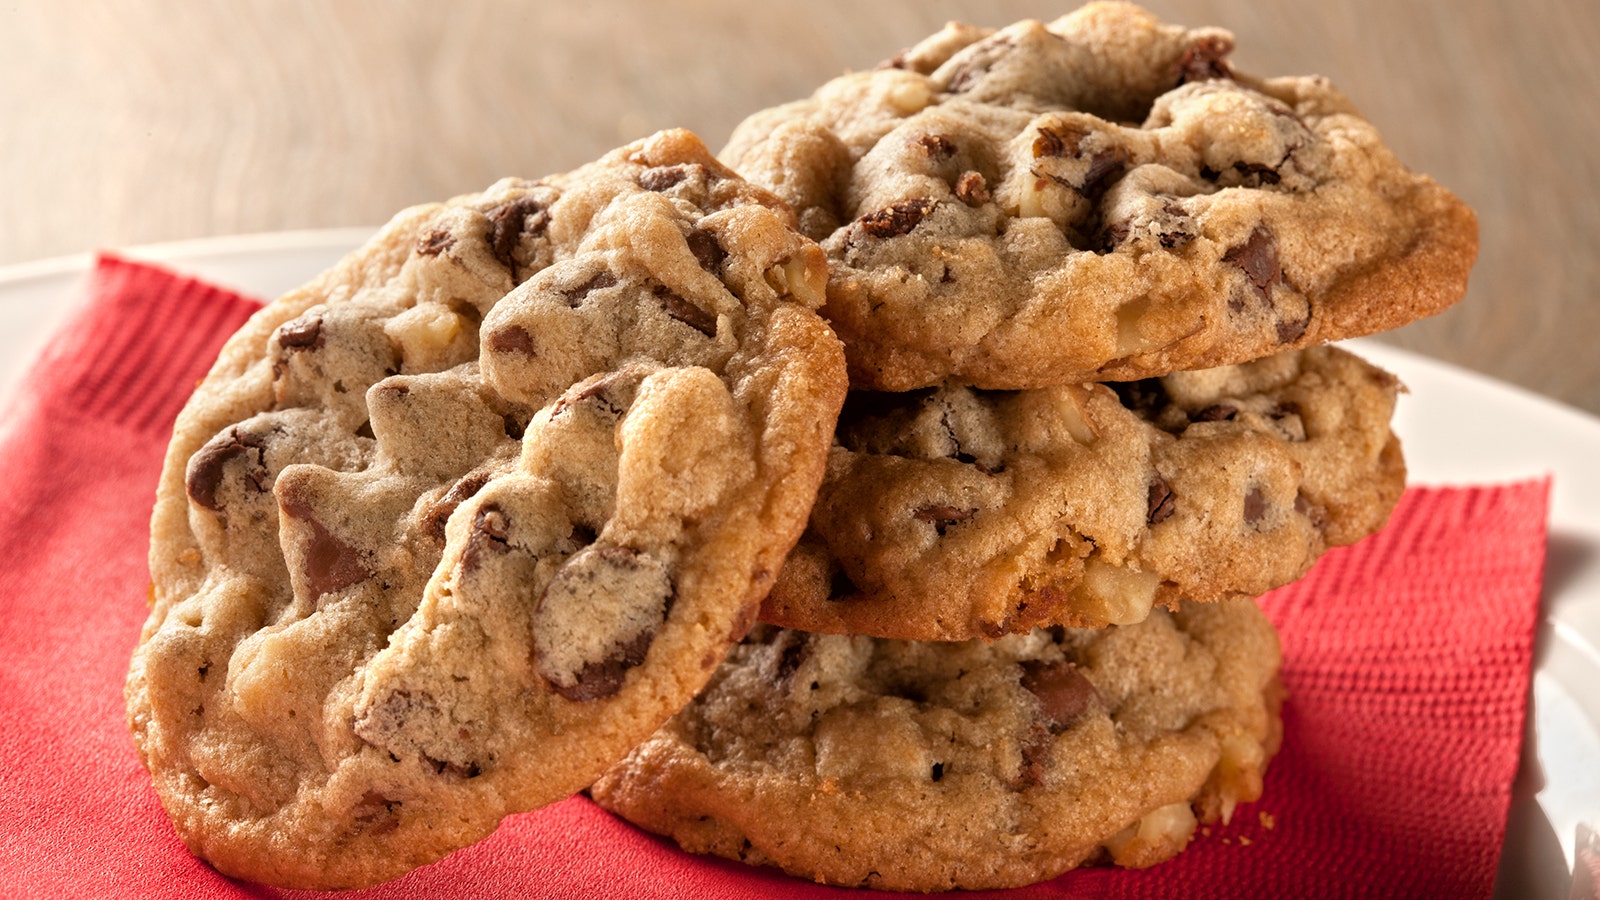 Commercial Banana Chocolate Chip Cookies